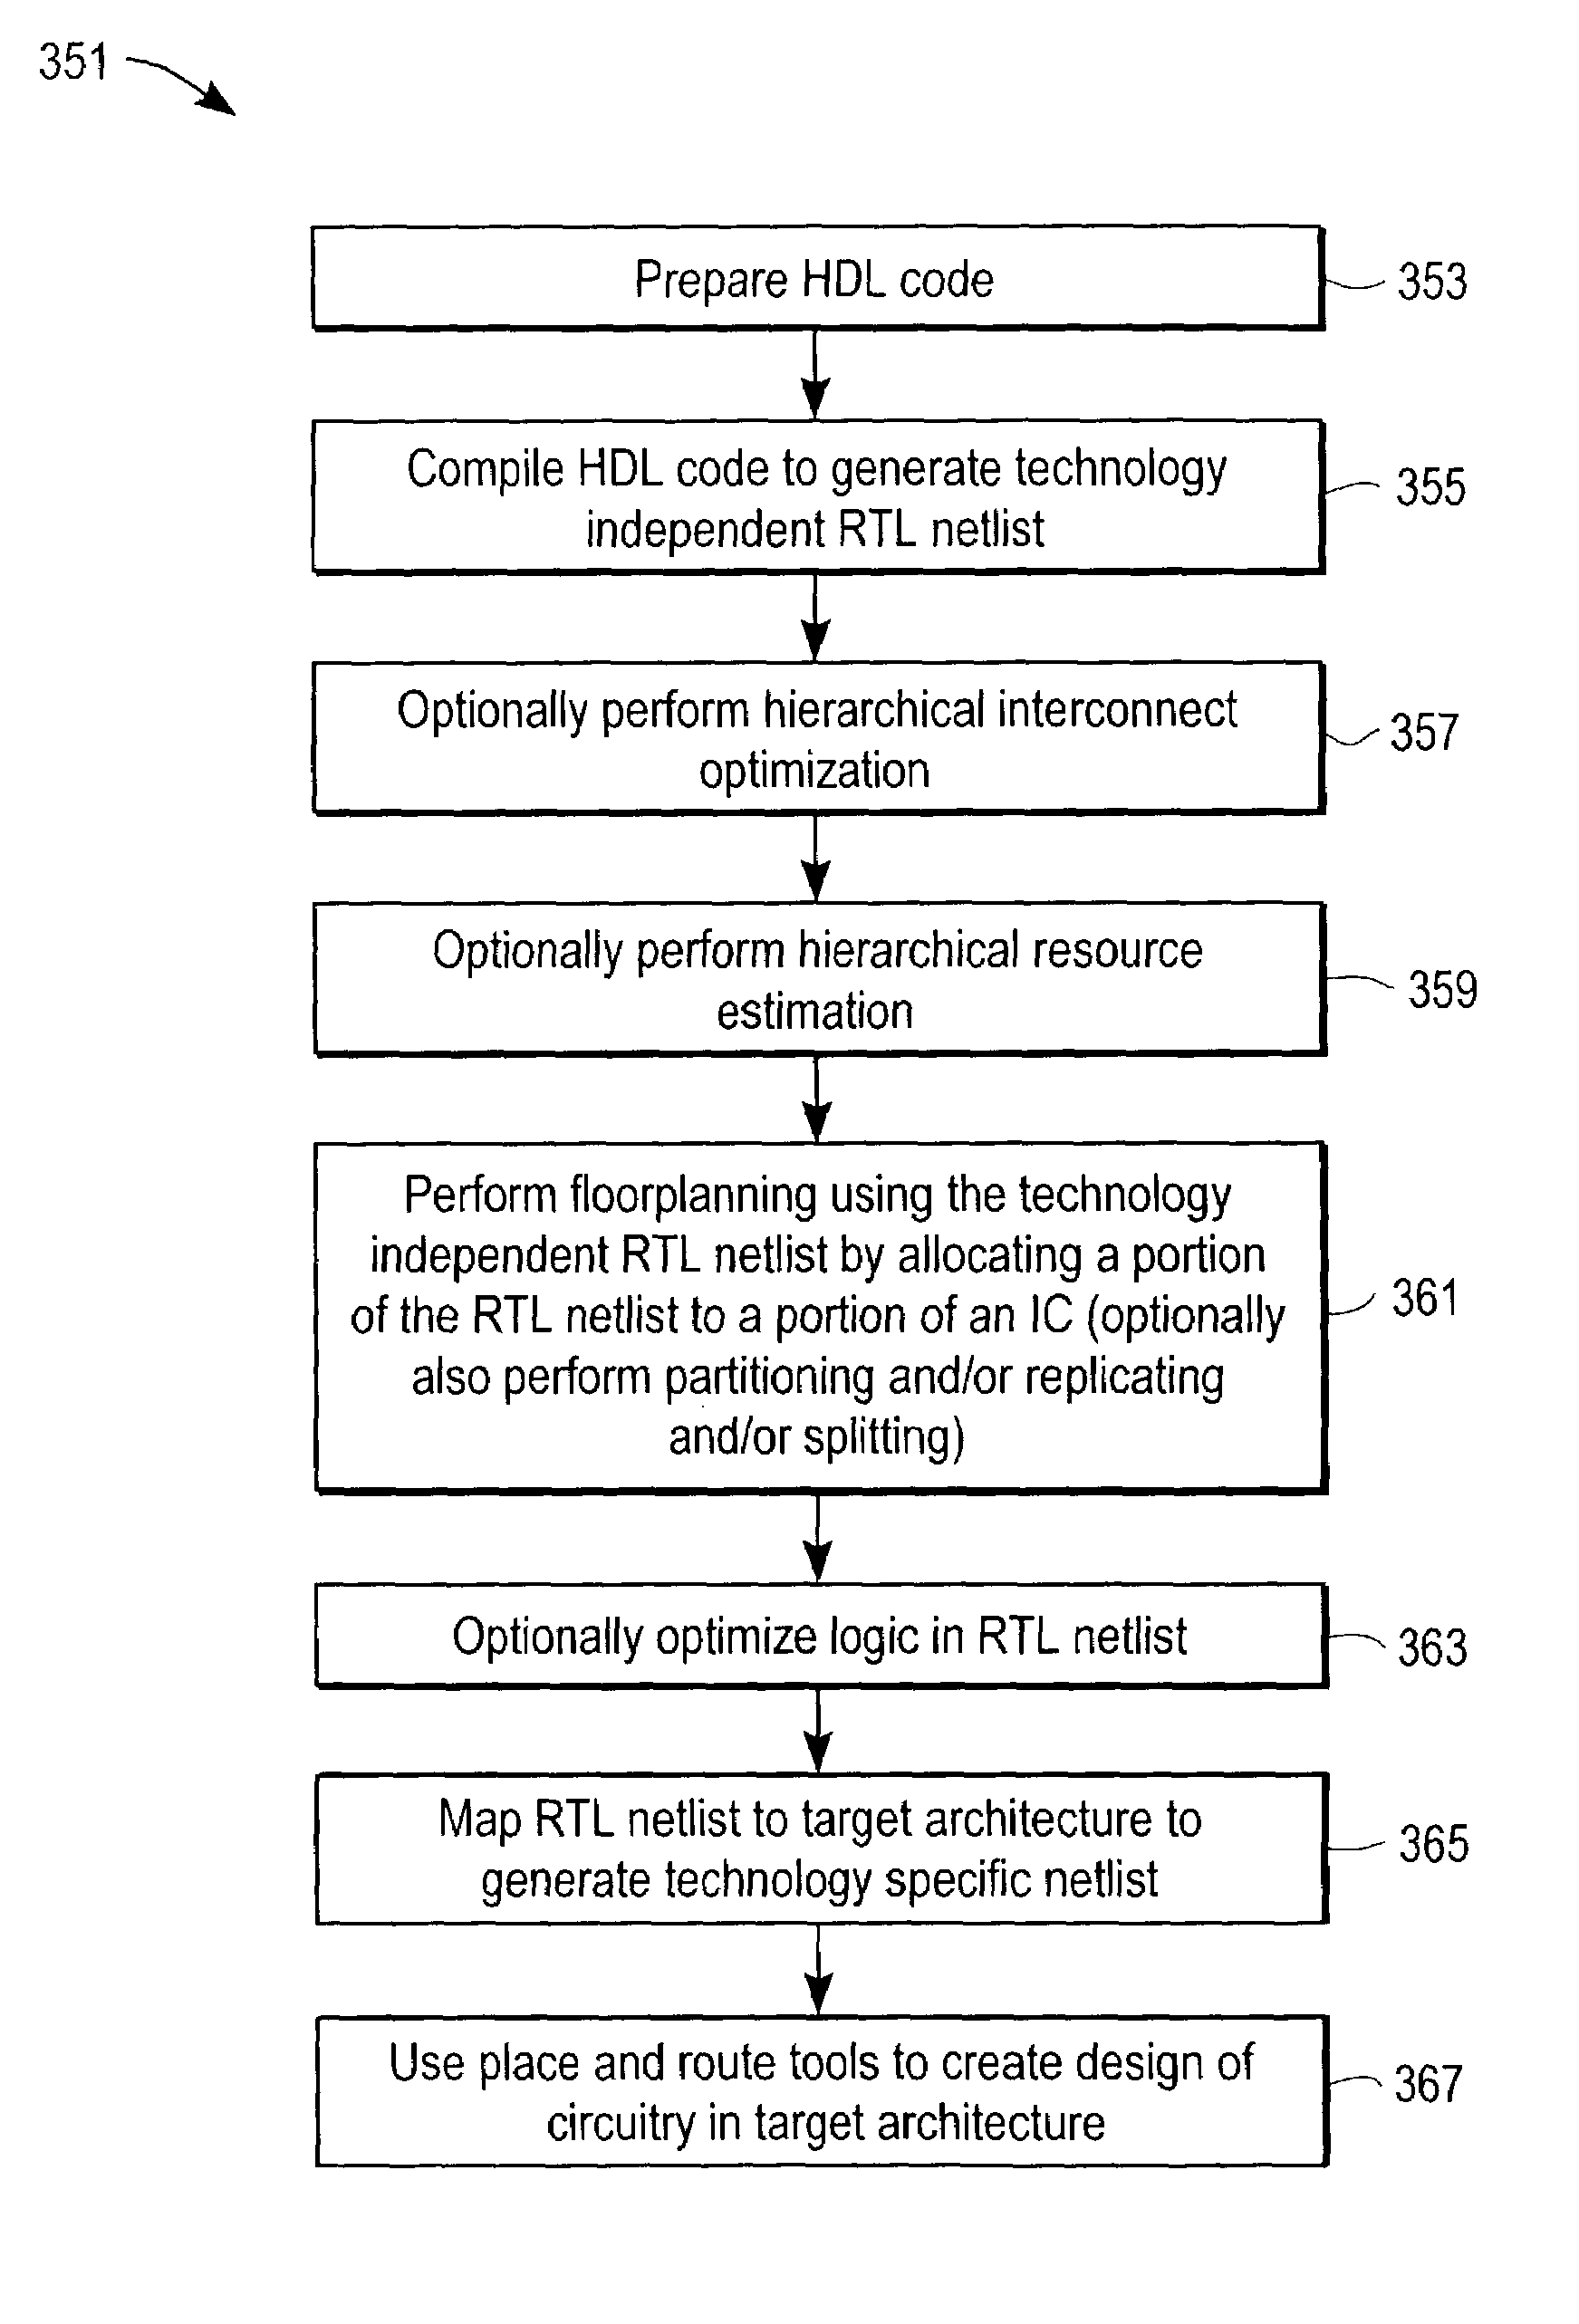 Methods and apparatuses for designing integrated circuits